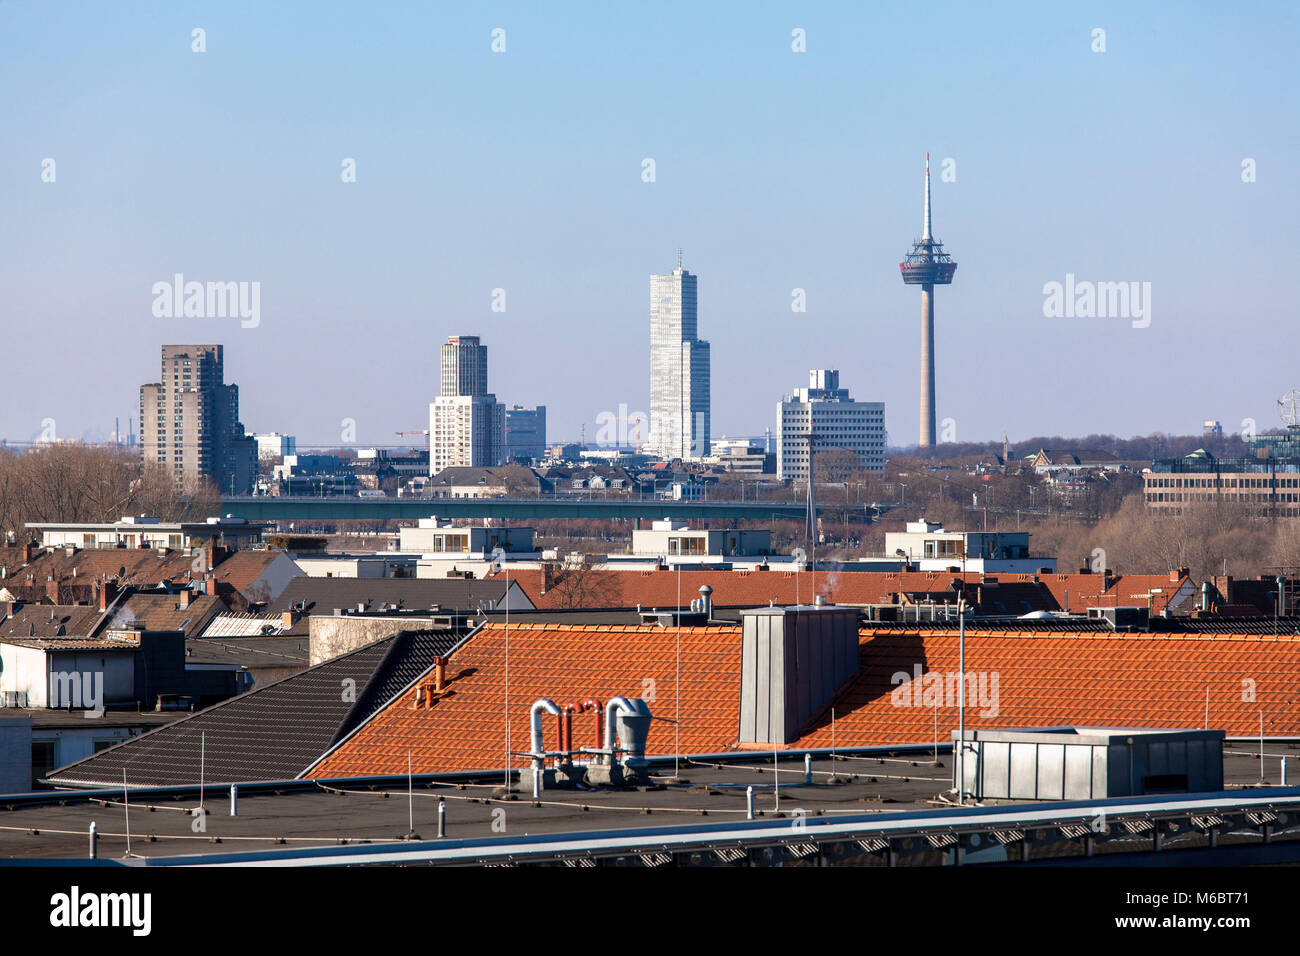 Germany, Cologne, view from the district Muelheim to the city with the Cologne Tower at the Mediapark (center) and the Colonius television tower.  Deu Stock Photo